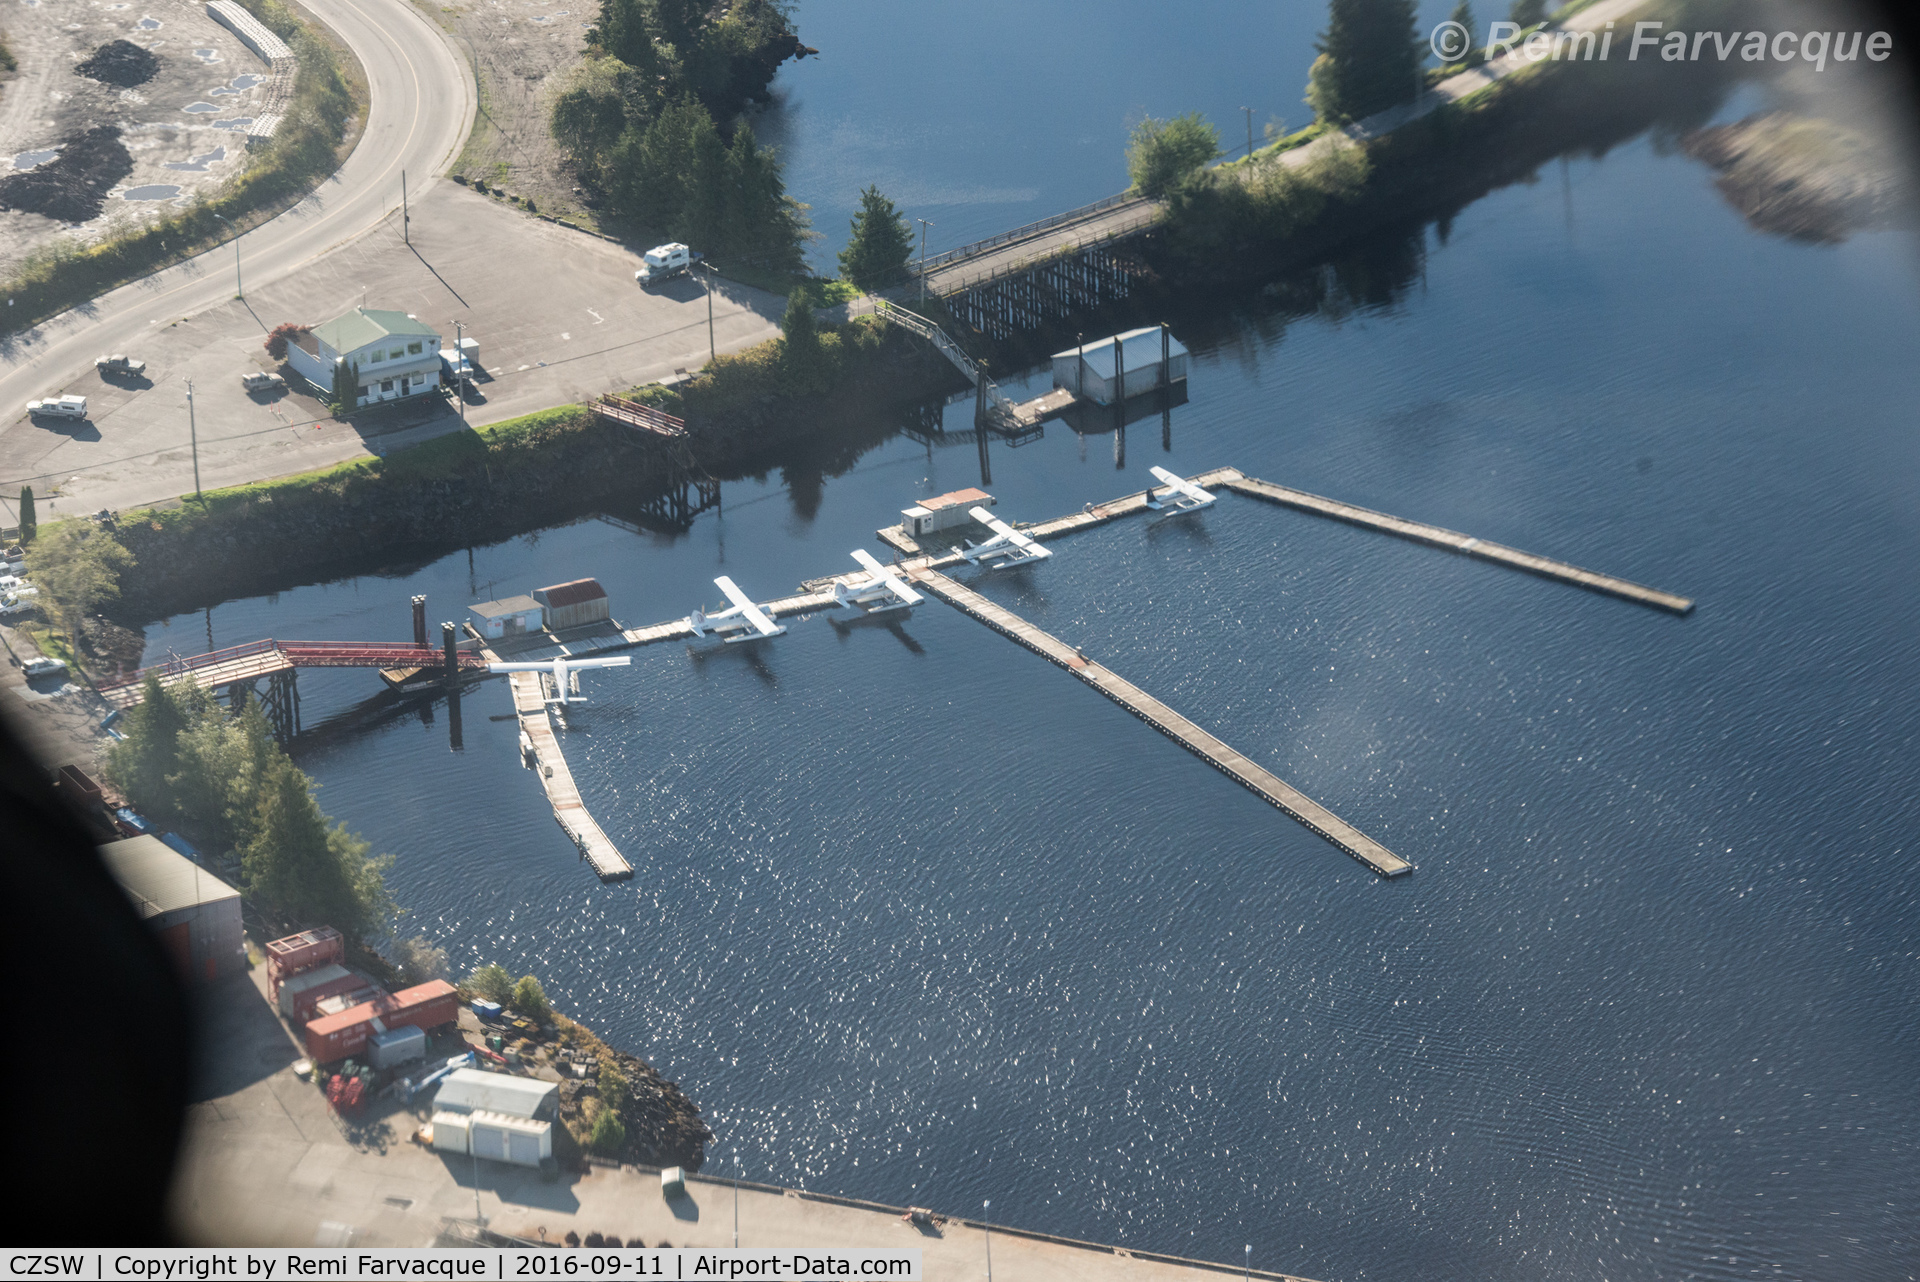 Prince Rupert/Seal Cove Water Airport, Prince Rupert, British Columbia Canada (CZSW) - General view of docks.